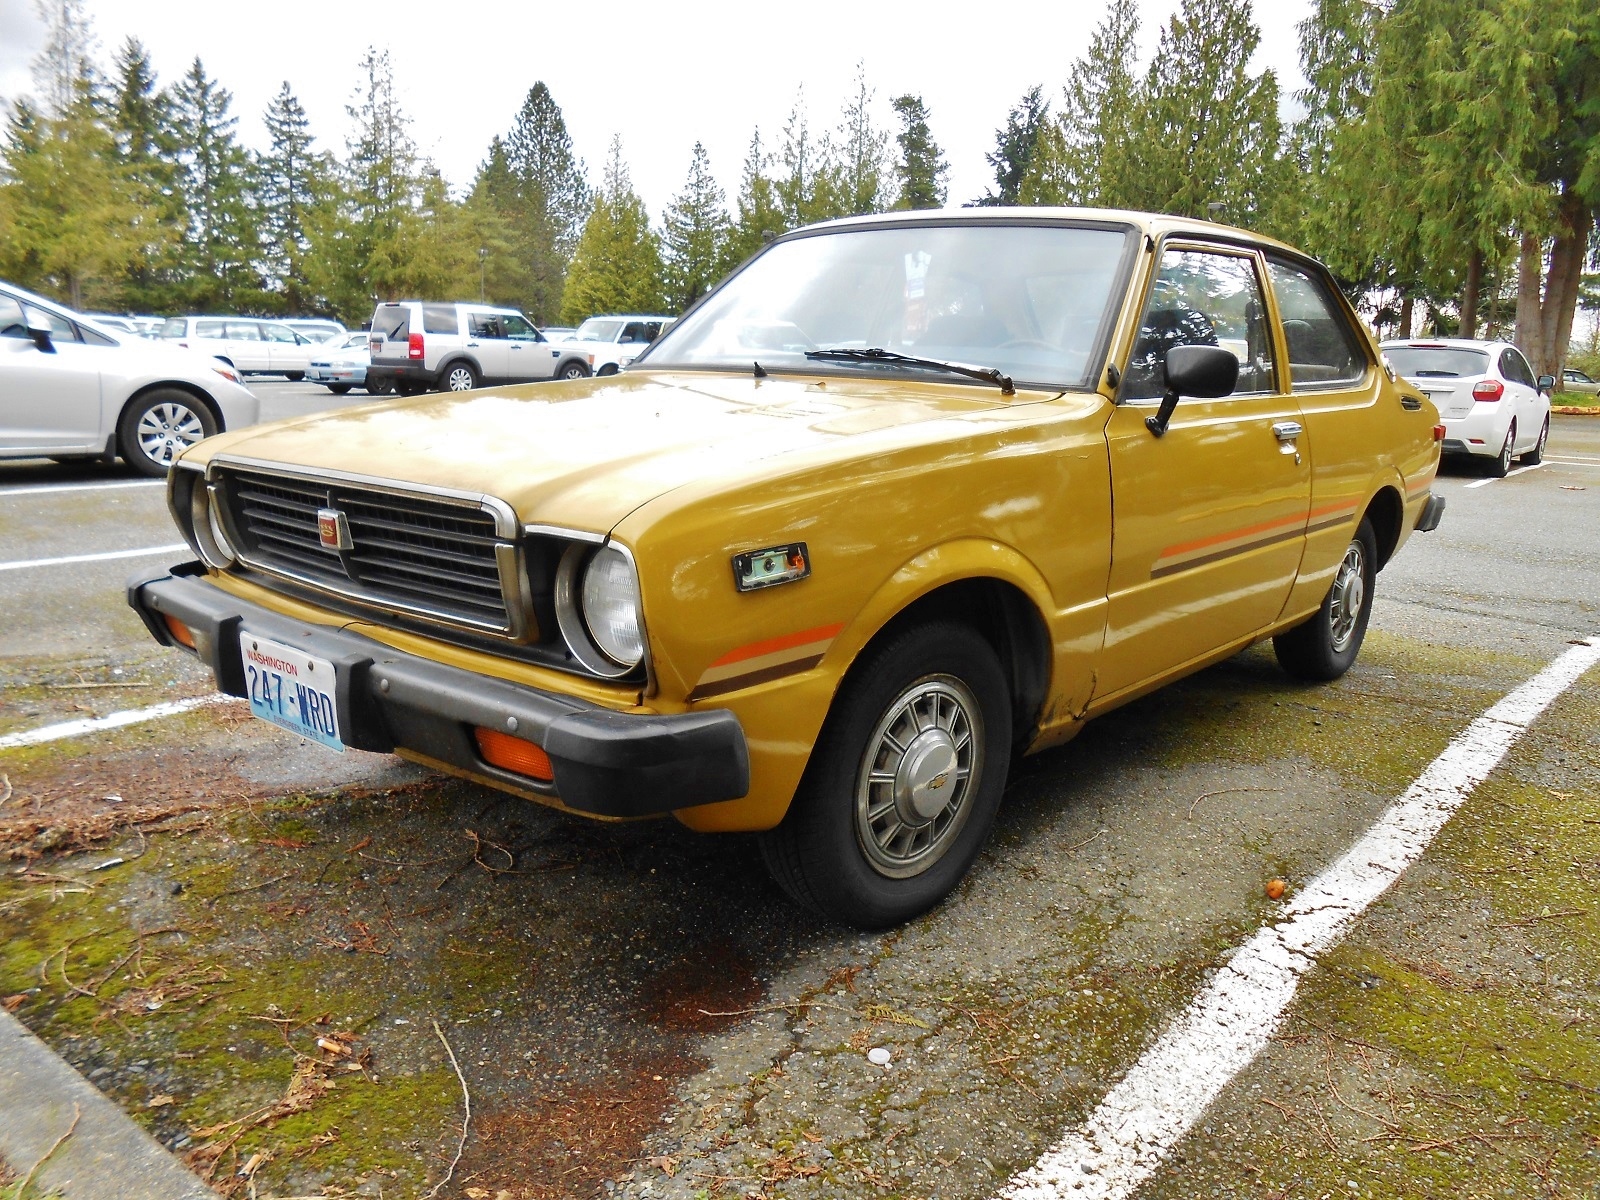 Seattle's Parked Cars: 1976 Toyota Corolla